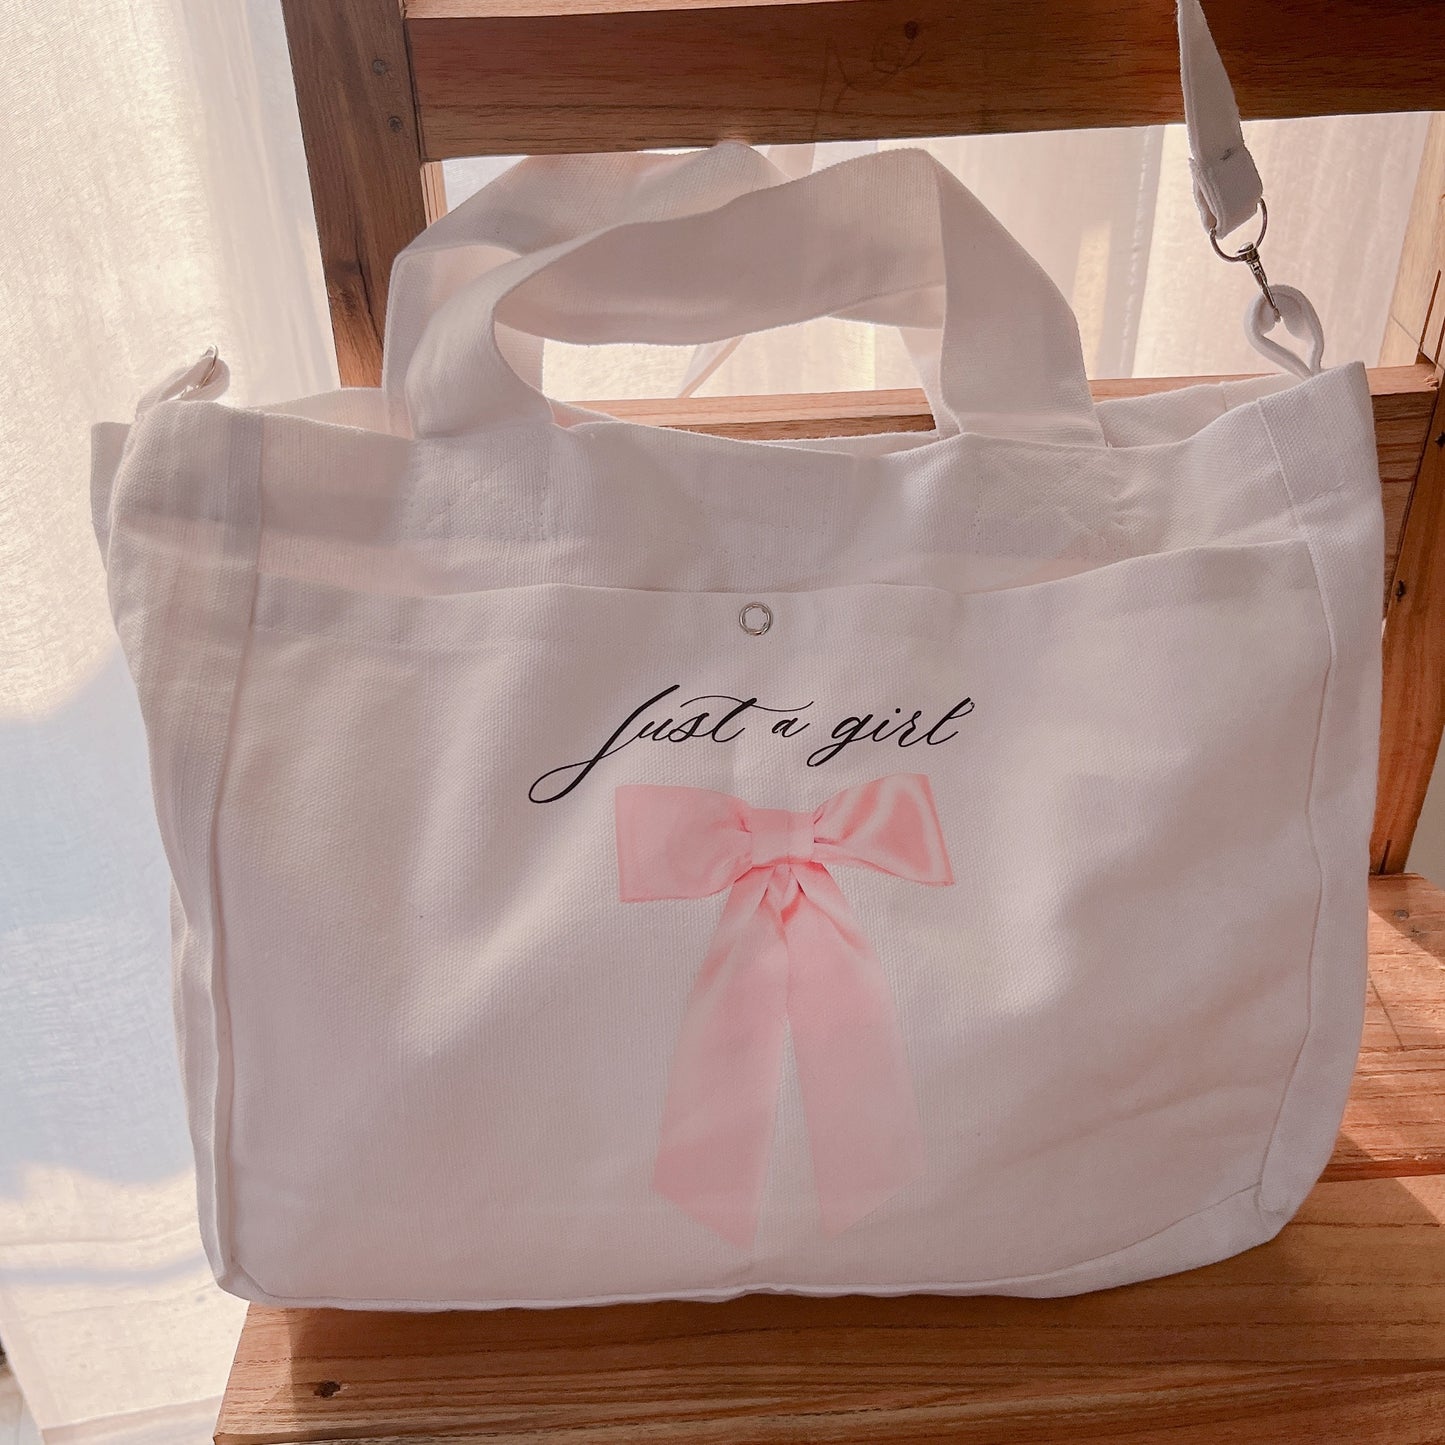 Just a girl Mini Totebag with sling